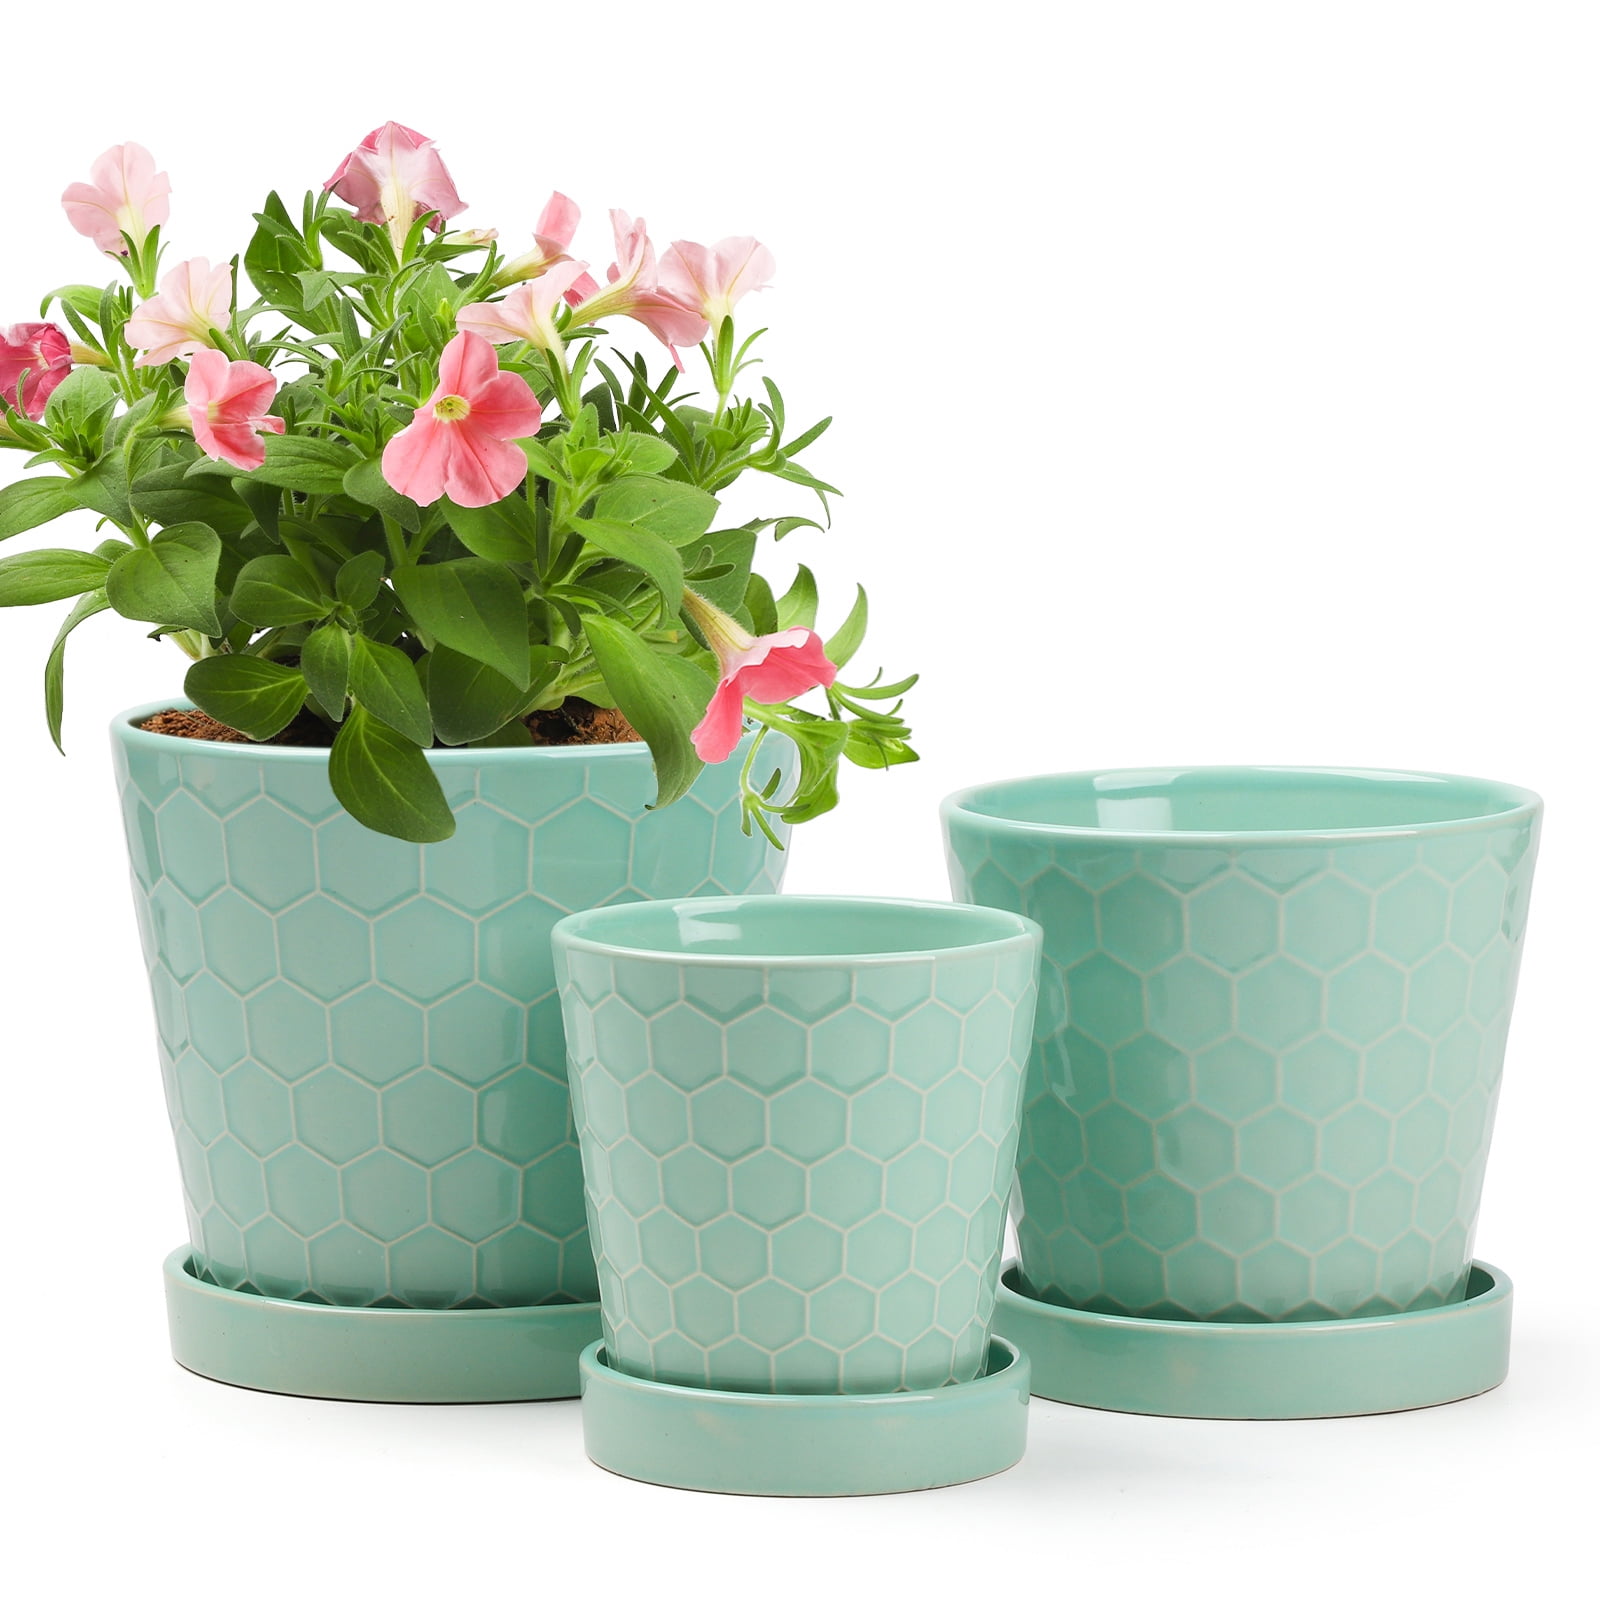 BUYMAX Plant Pots Indoor –5 inch Ceramic Flower Pot with Drainage Hole -  NbuFlowers